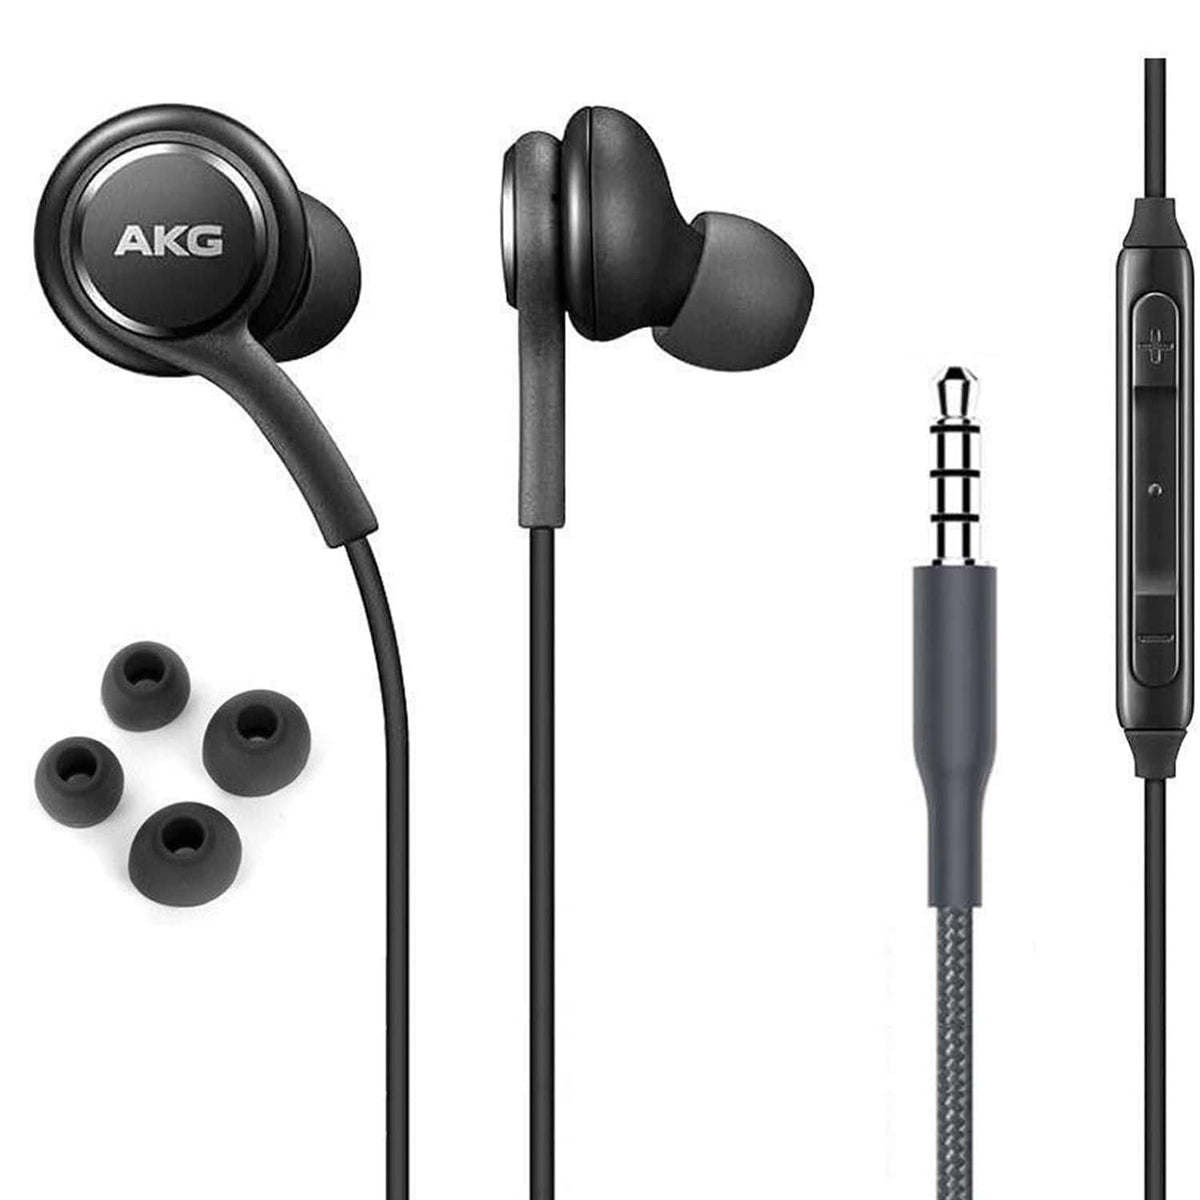 OEM ElloGear Earbuds Stereo Headphones for Samsung Galaxy S10 S10e Plus A31 A71 Cable - Designed by AKG - with Microphone and Volume Buttons (Black)